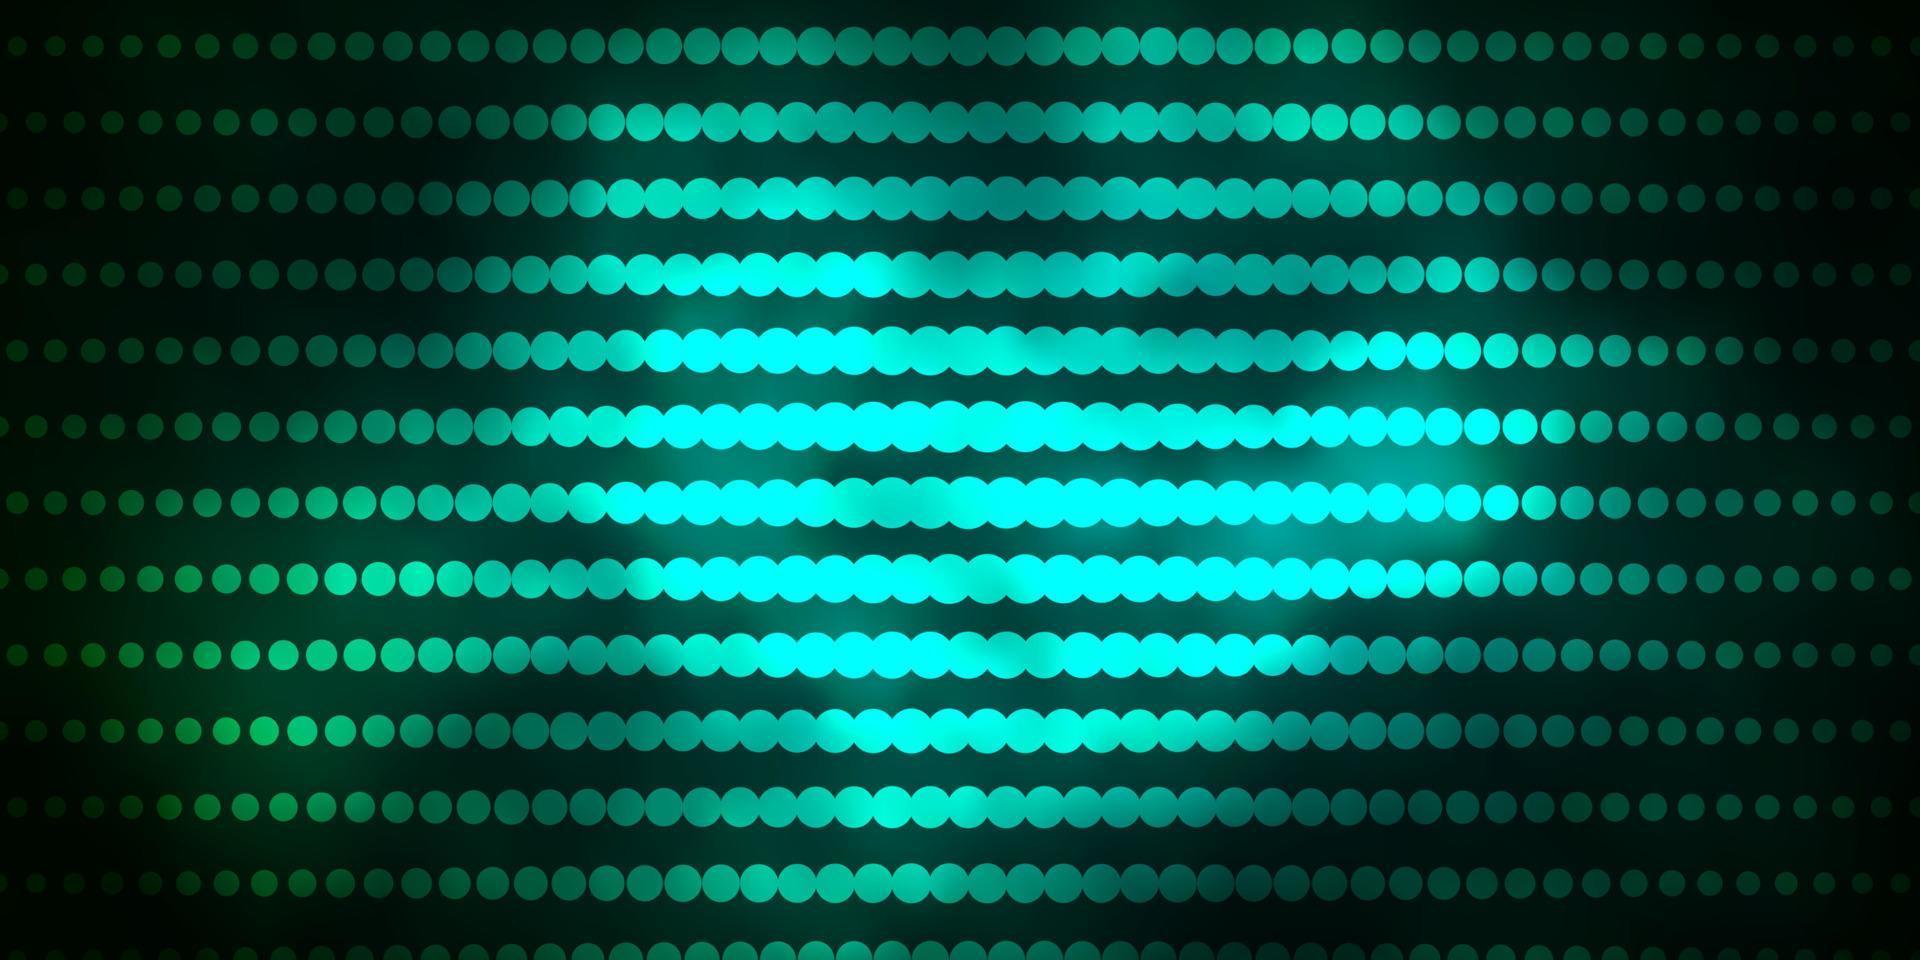 Dark Green vector background with circles.